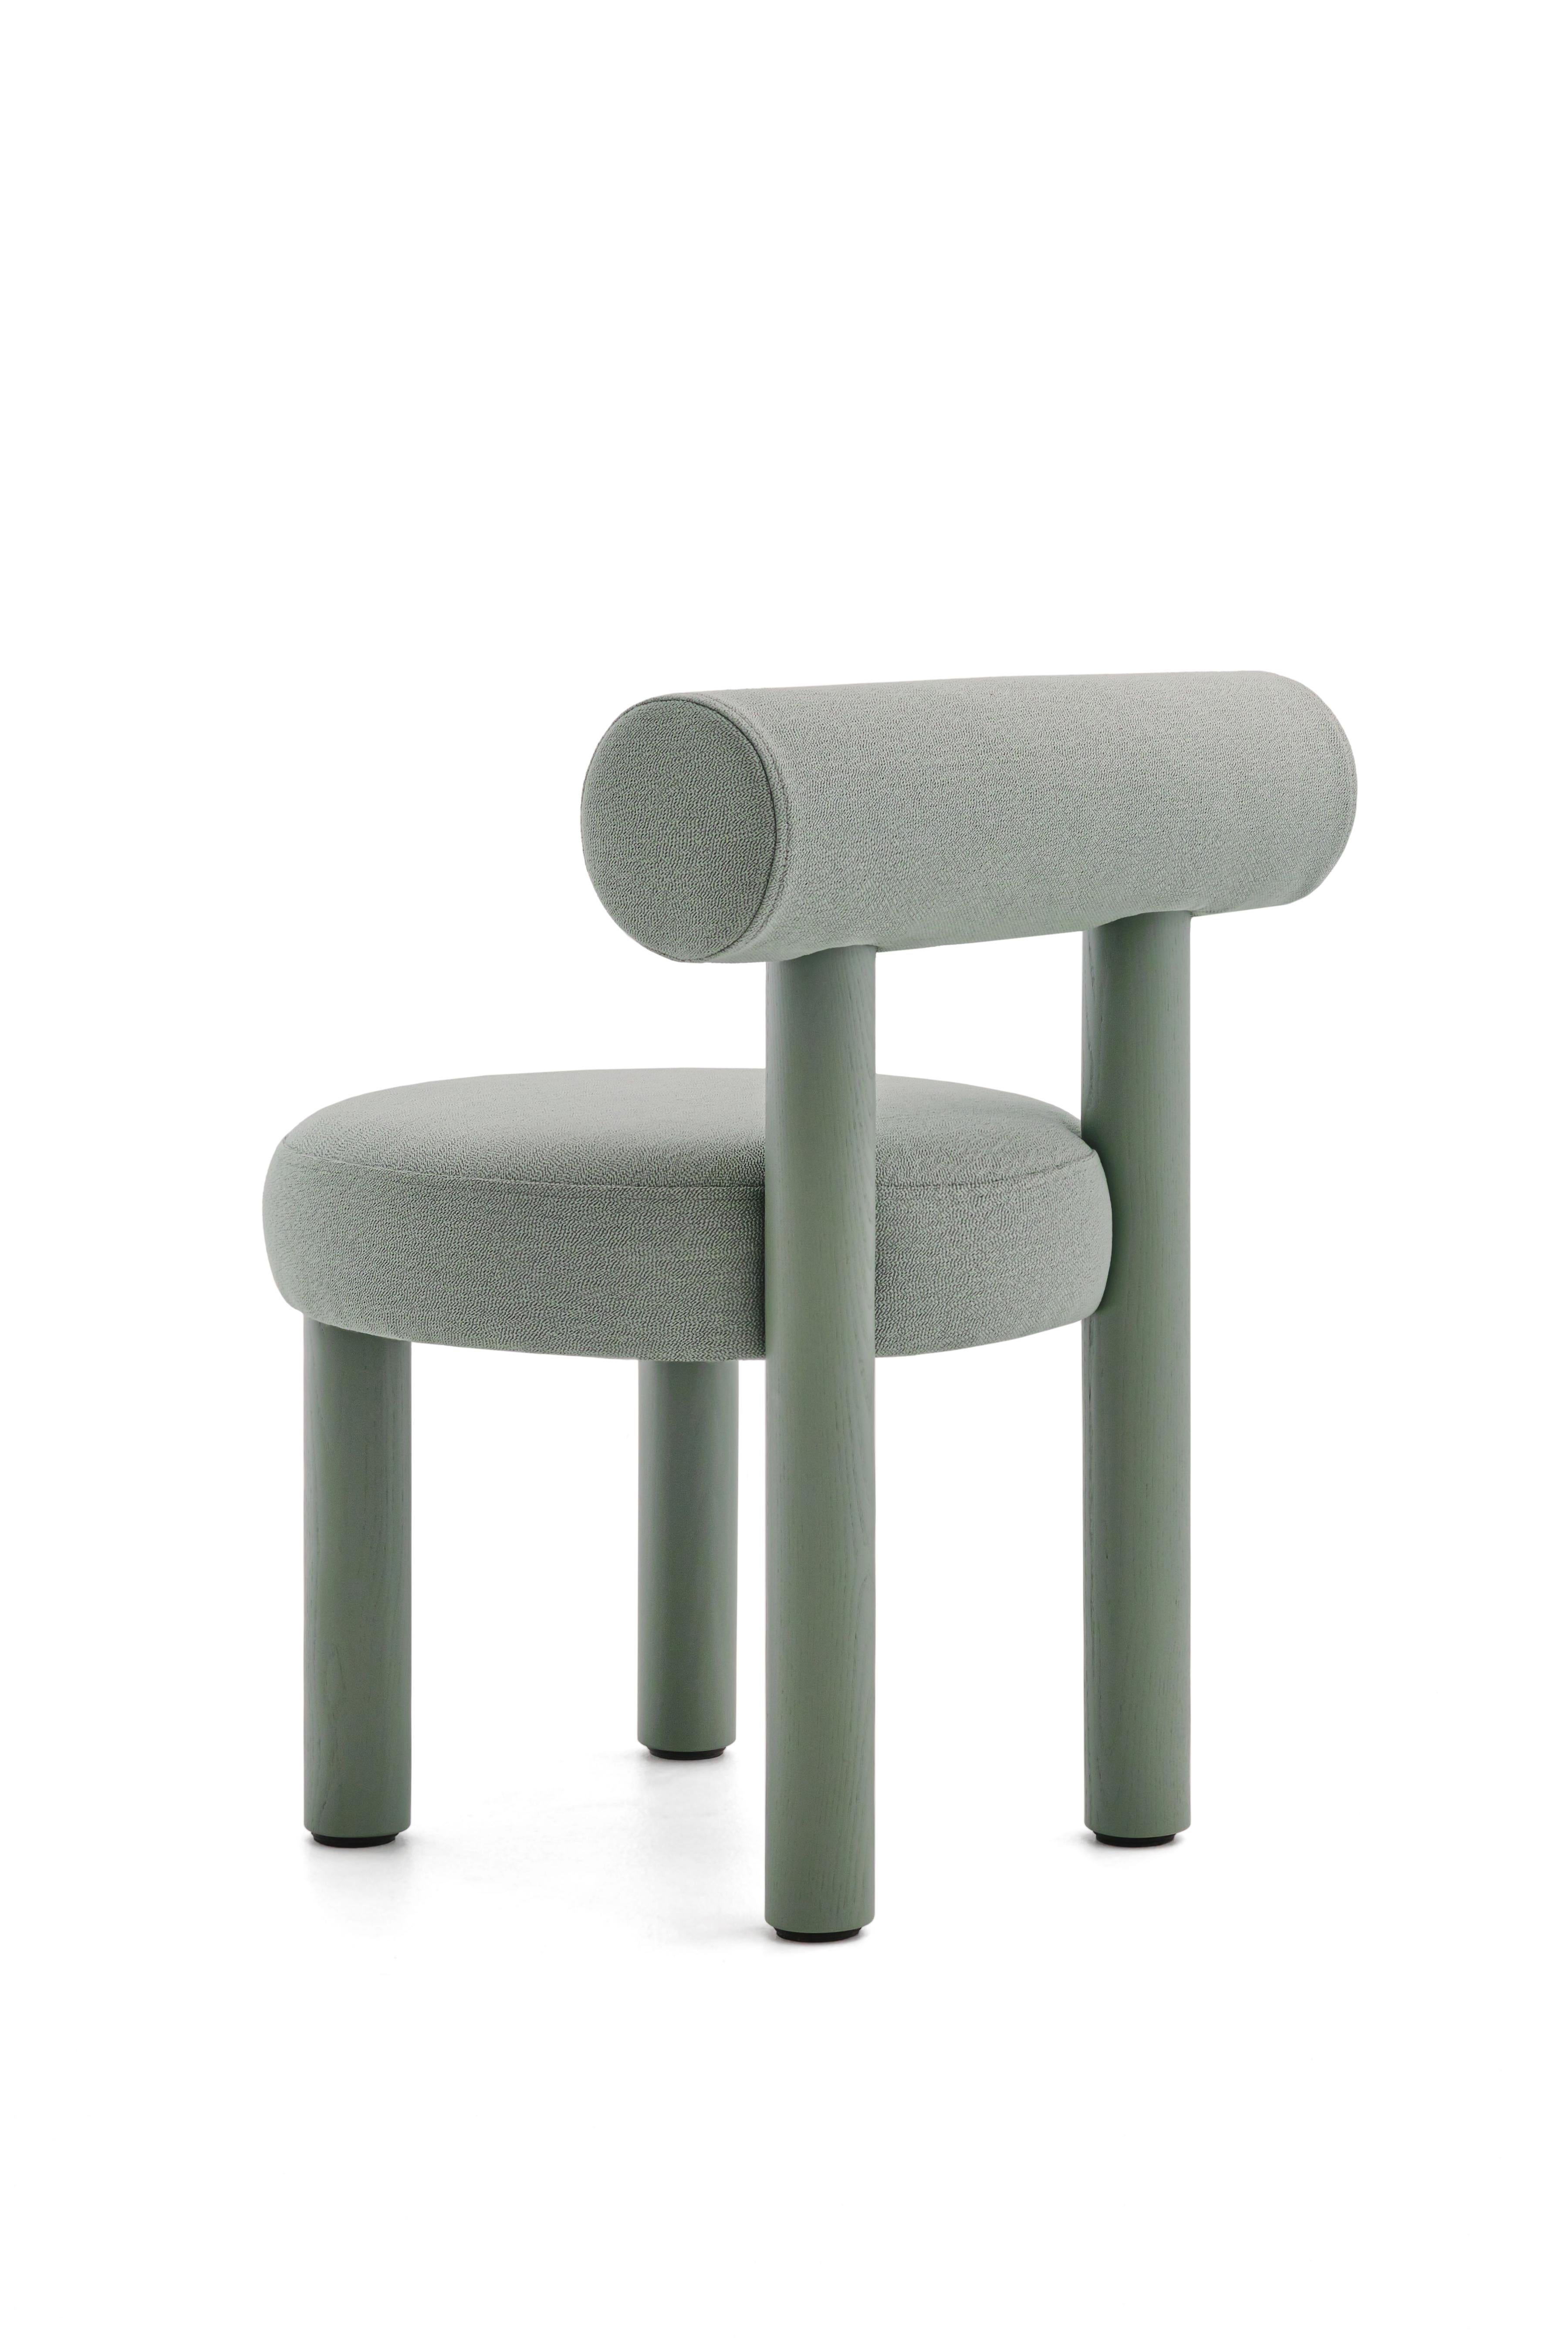 Chair Gropius CS2

Designer: Kateryna Sokolova

Model in the main picture Savoy FR, Arco Rohi Aqua

Dimensions:
Height: 74 cm / 29,13 in
Width: 57 cm / 22,44 in
Depth: 57 cm / 22,44 in
Seat height: 47 cm / 18,11 in

New NOOM furniture